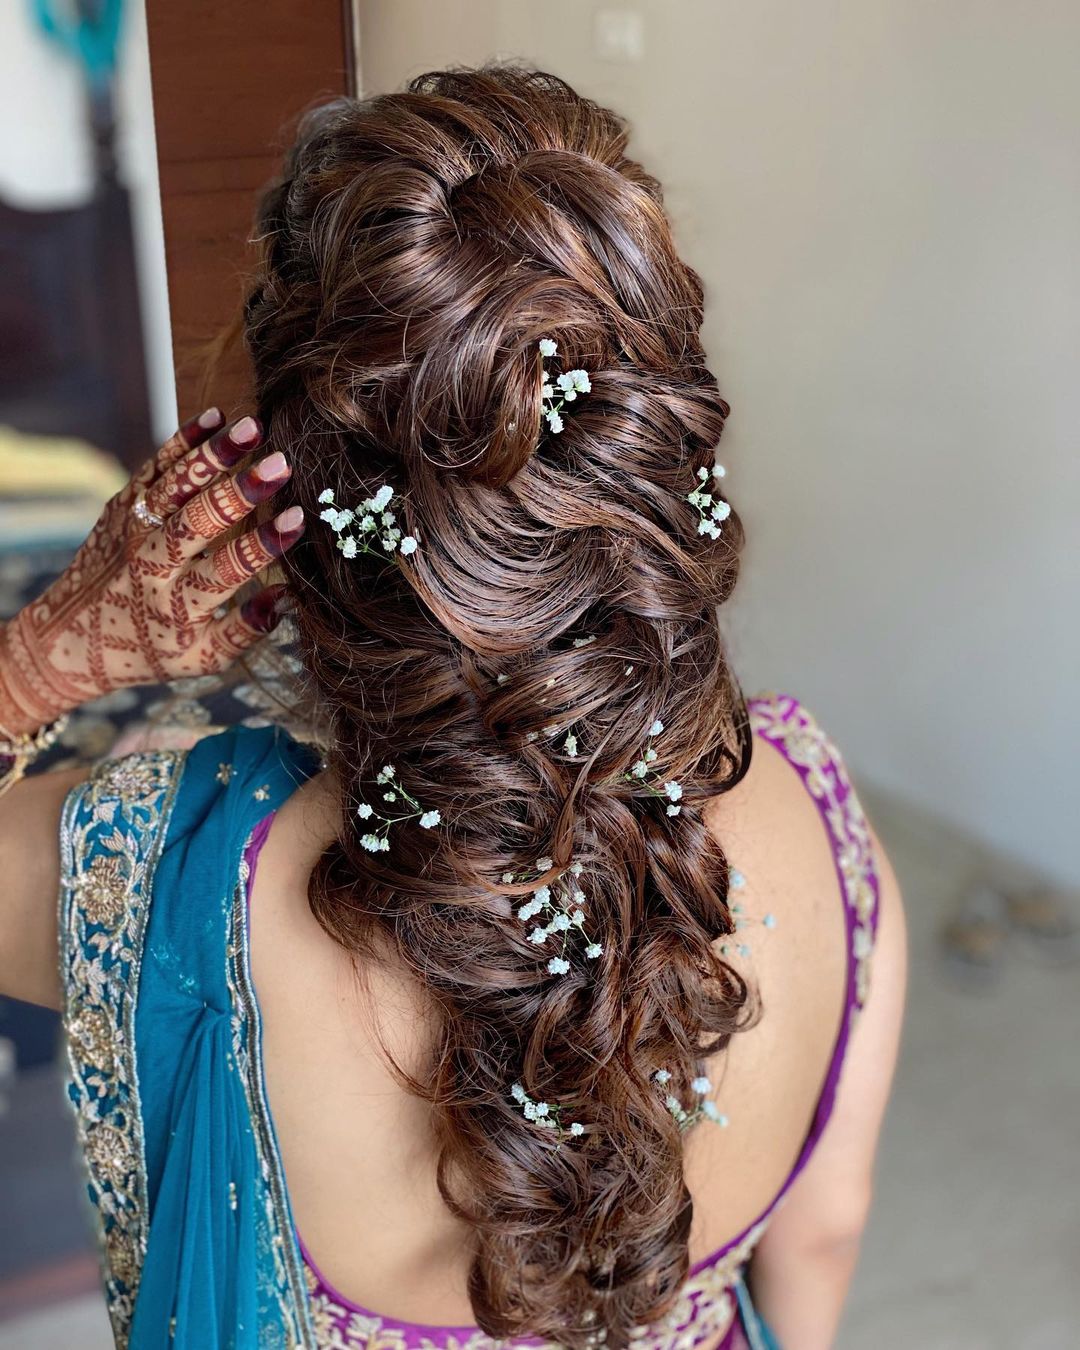 10 Bridal Bun Hairstyles for Every Kind of Bride! | Real Wedding Stories |  Wedding Blog